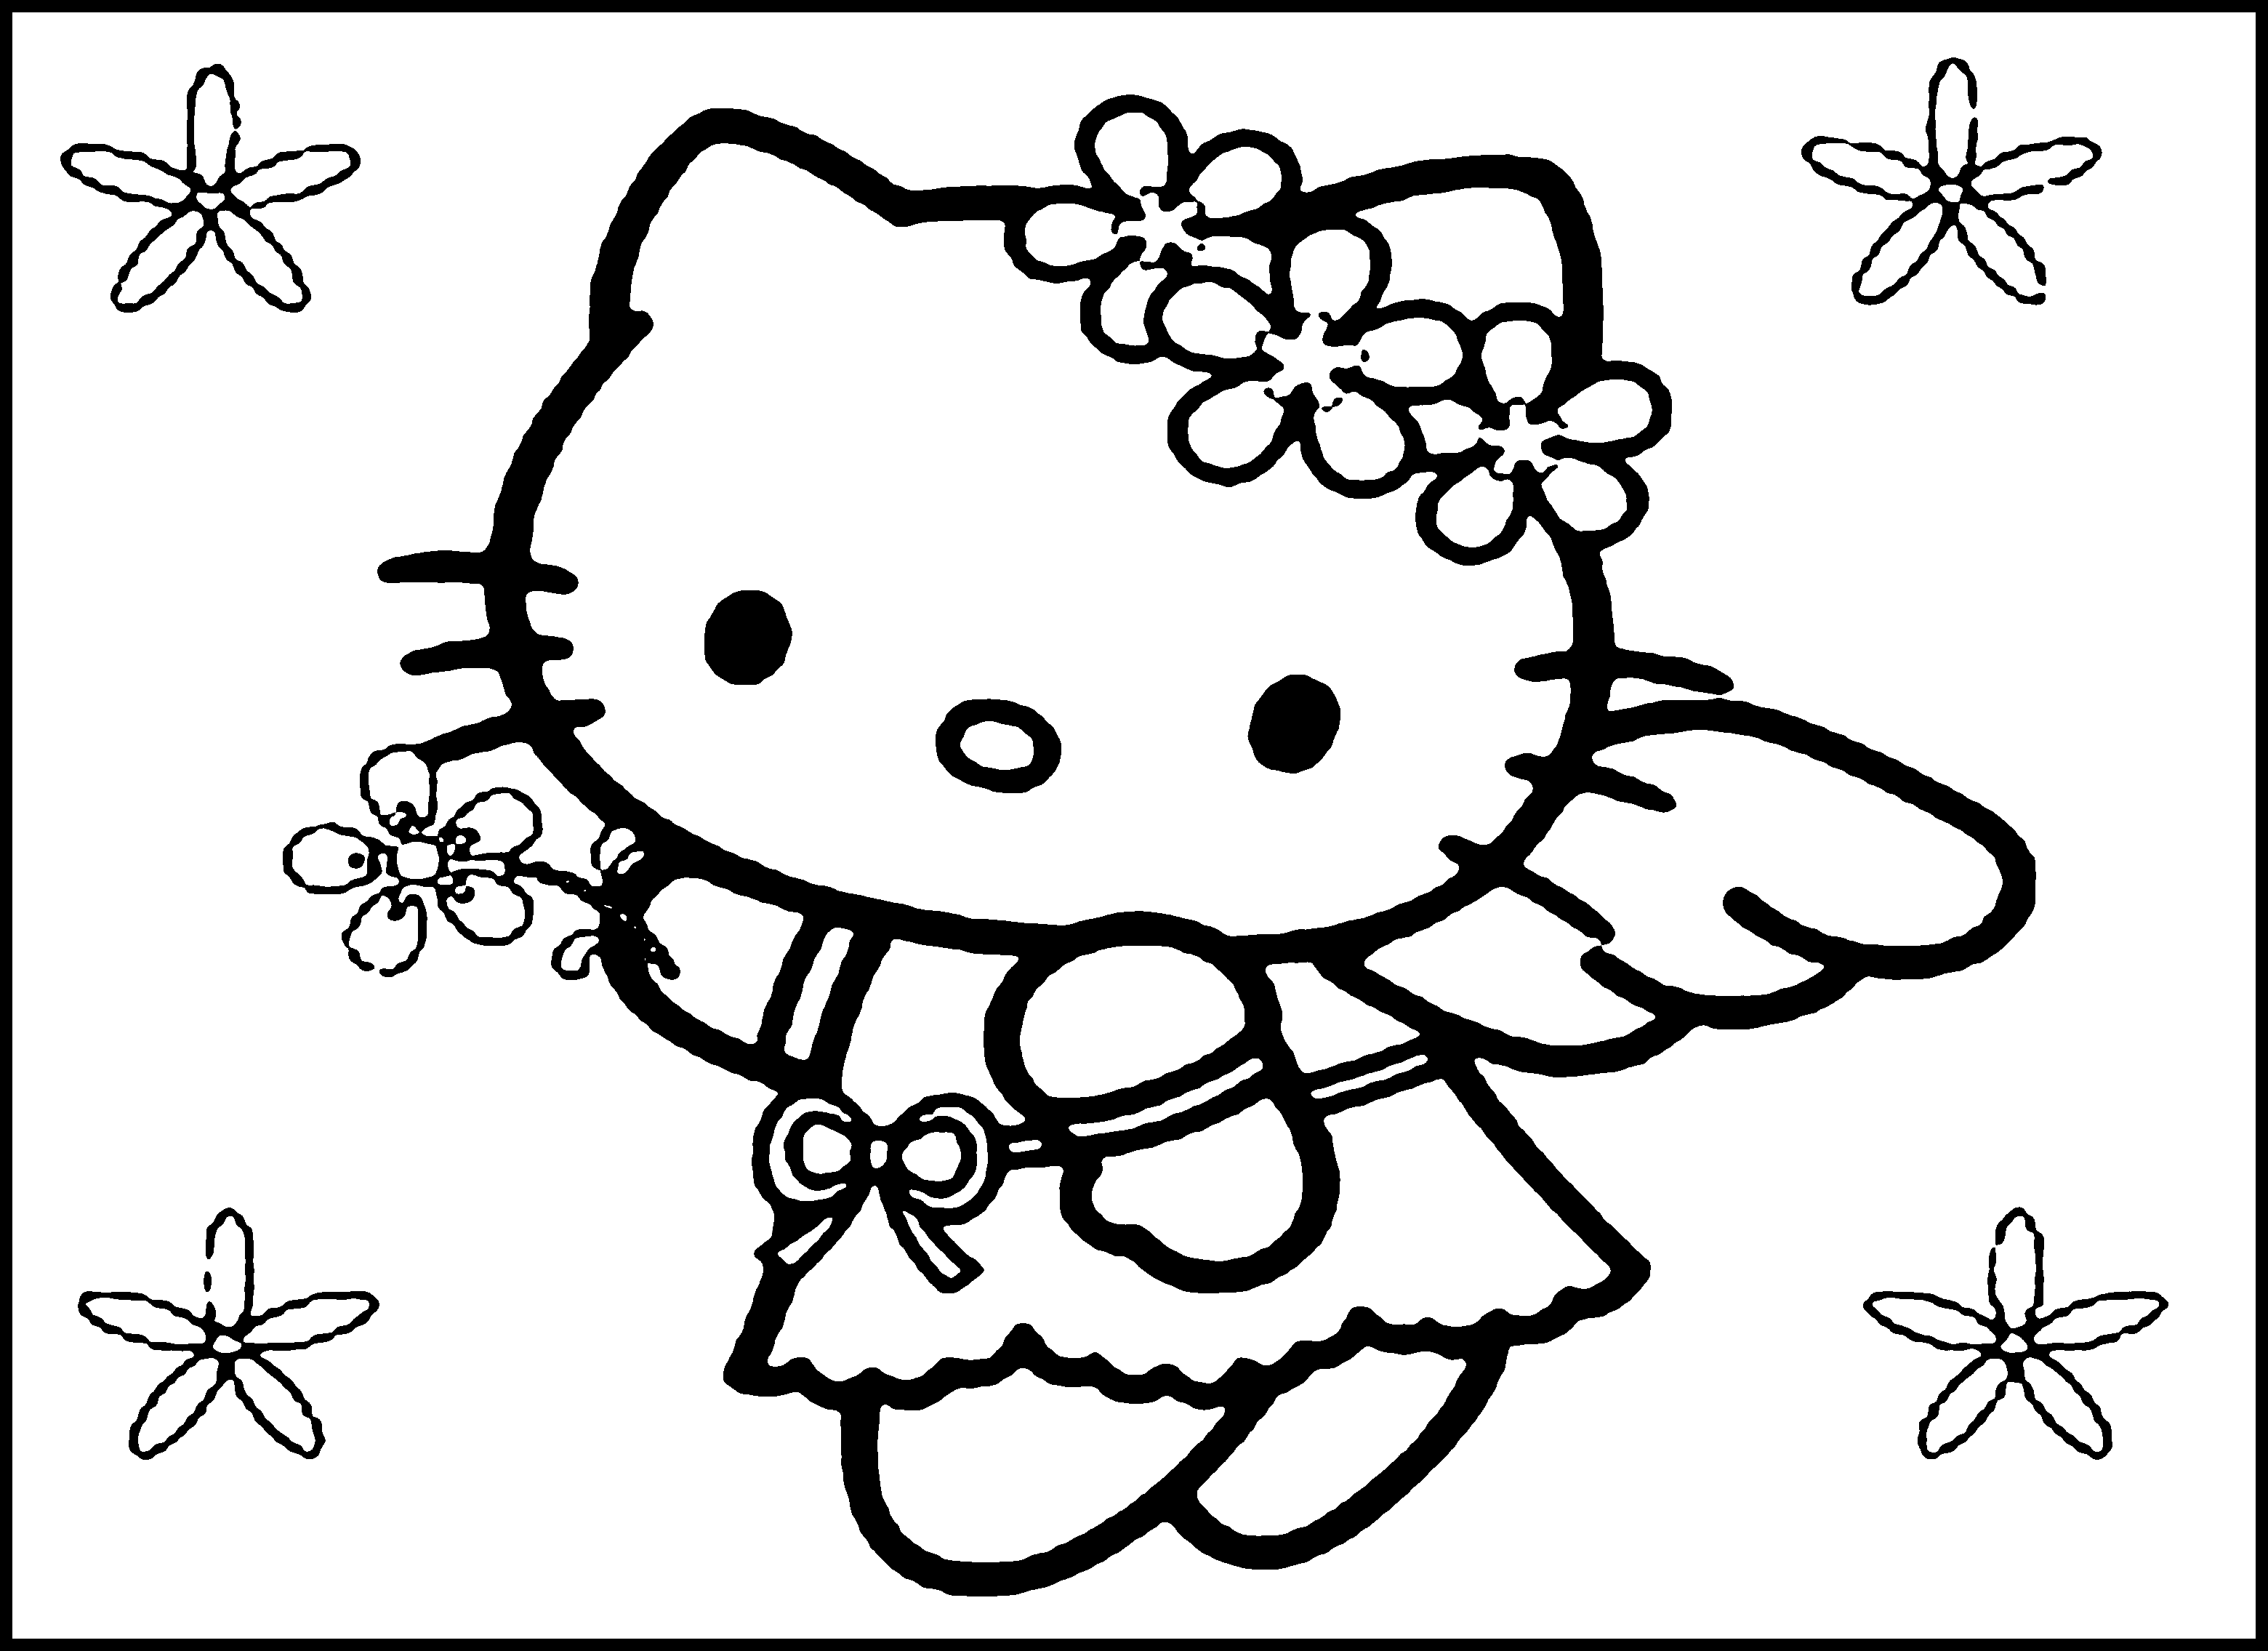 Download or print this amazing coloring page: Printable Hello Kitty Colorin...